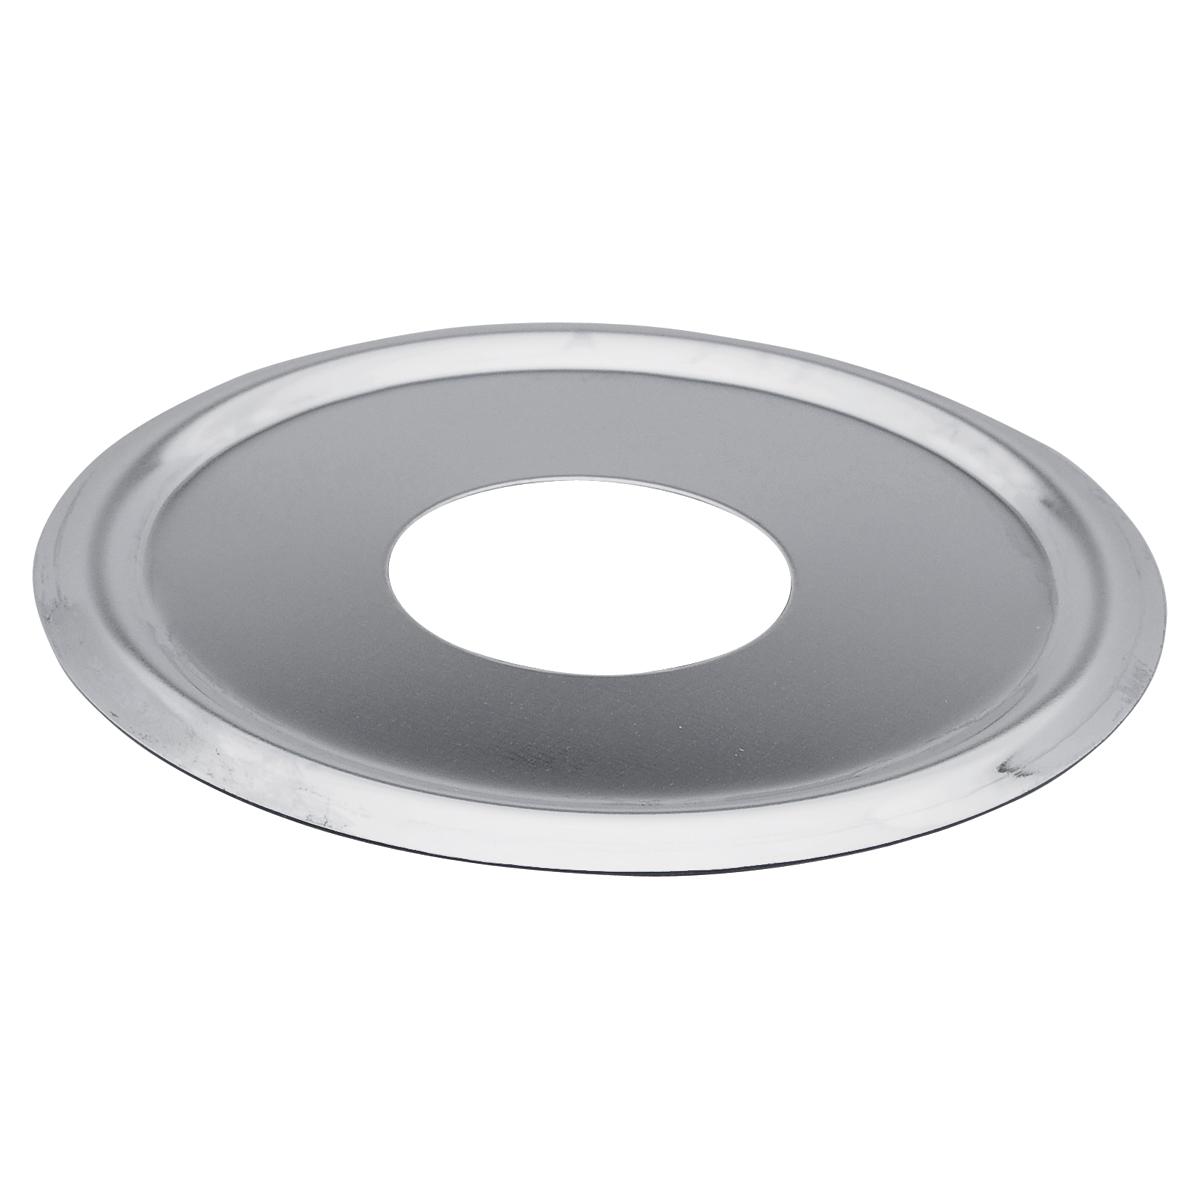 COVER PLATE 25MM OD FLAT